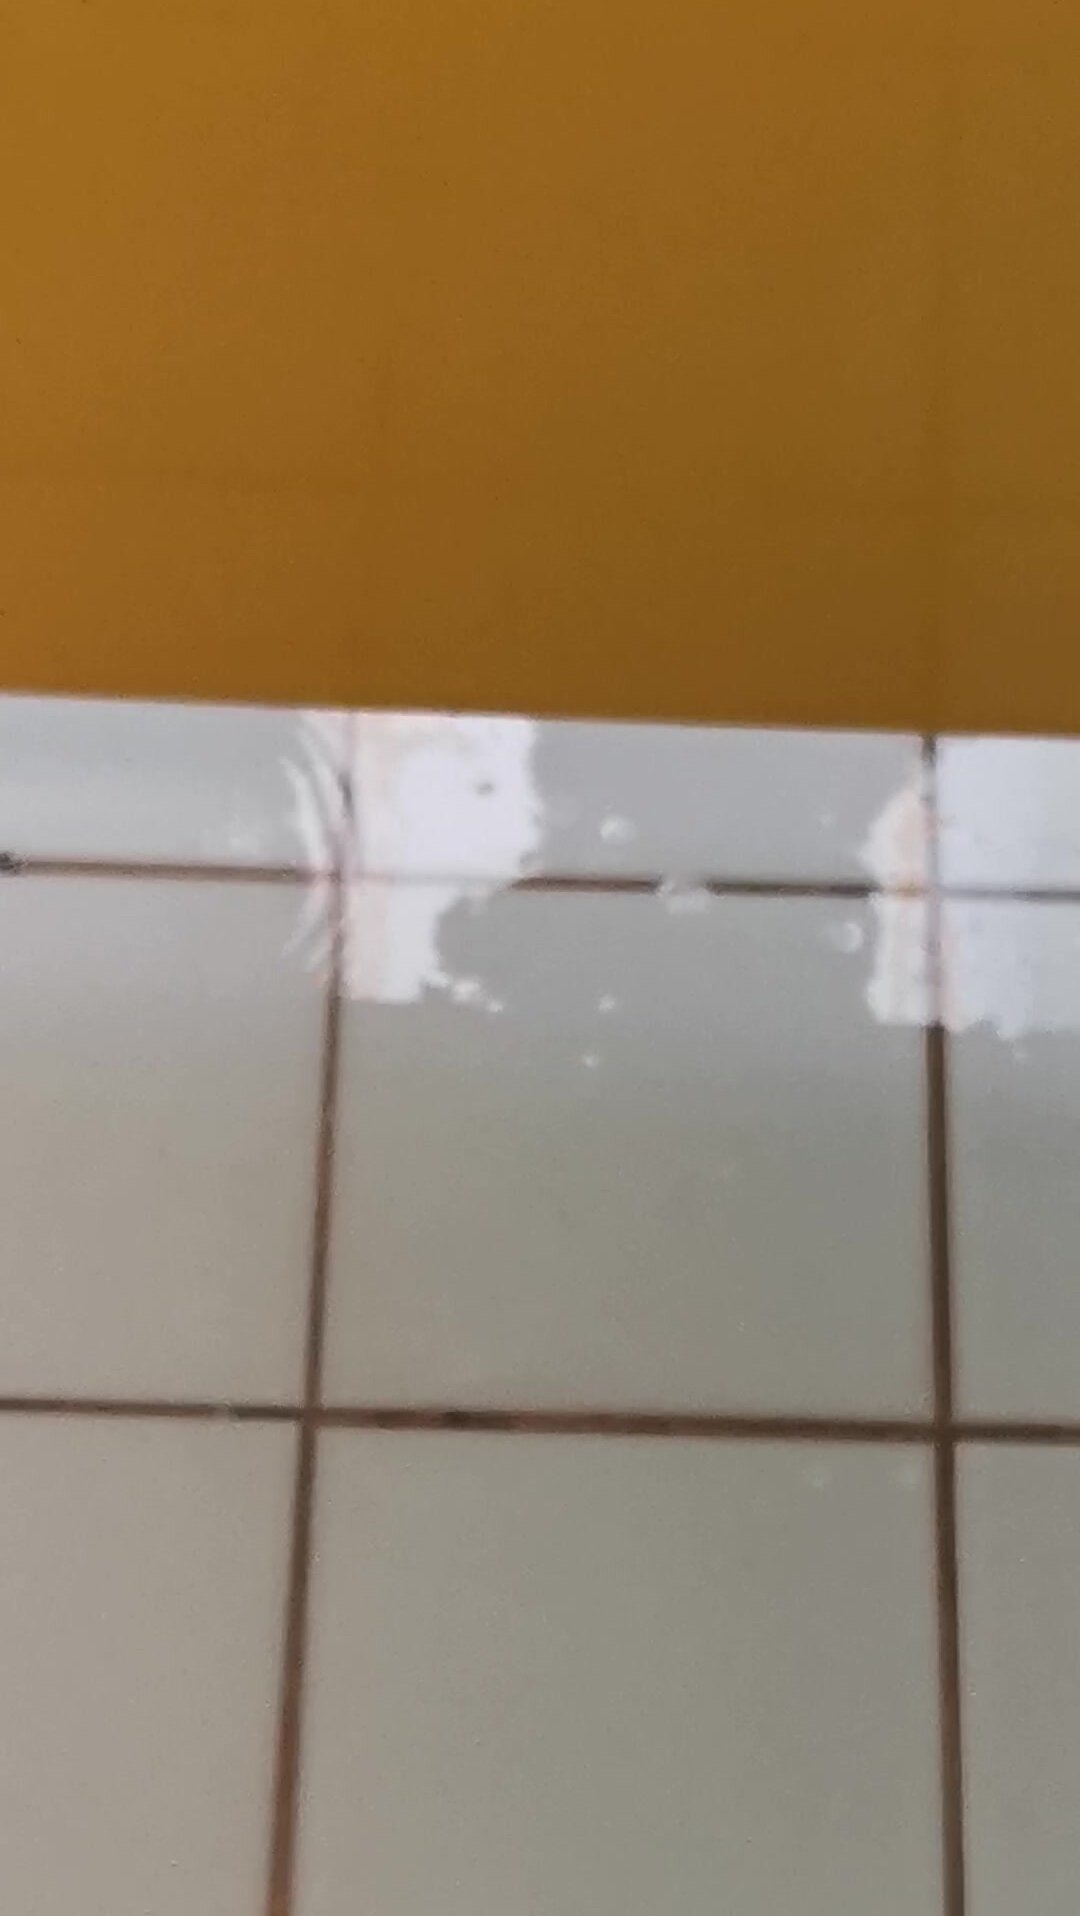 Spying dick in public shower with water reflect